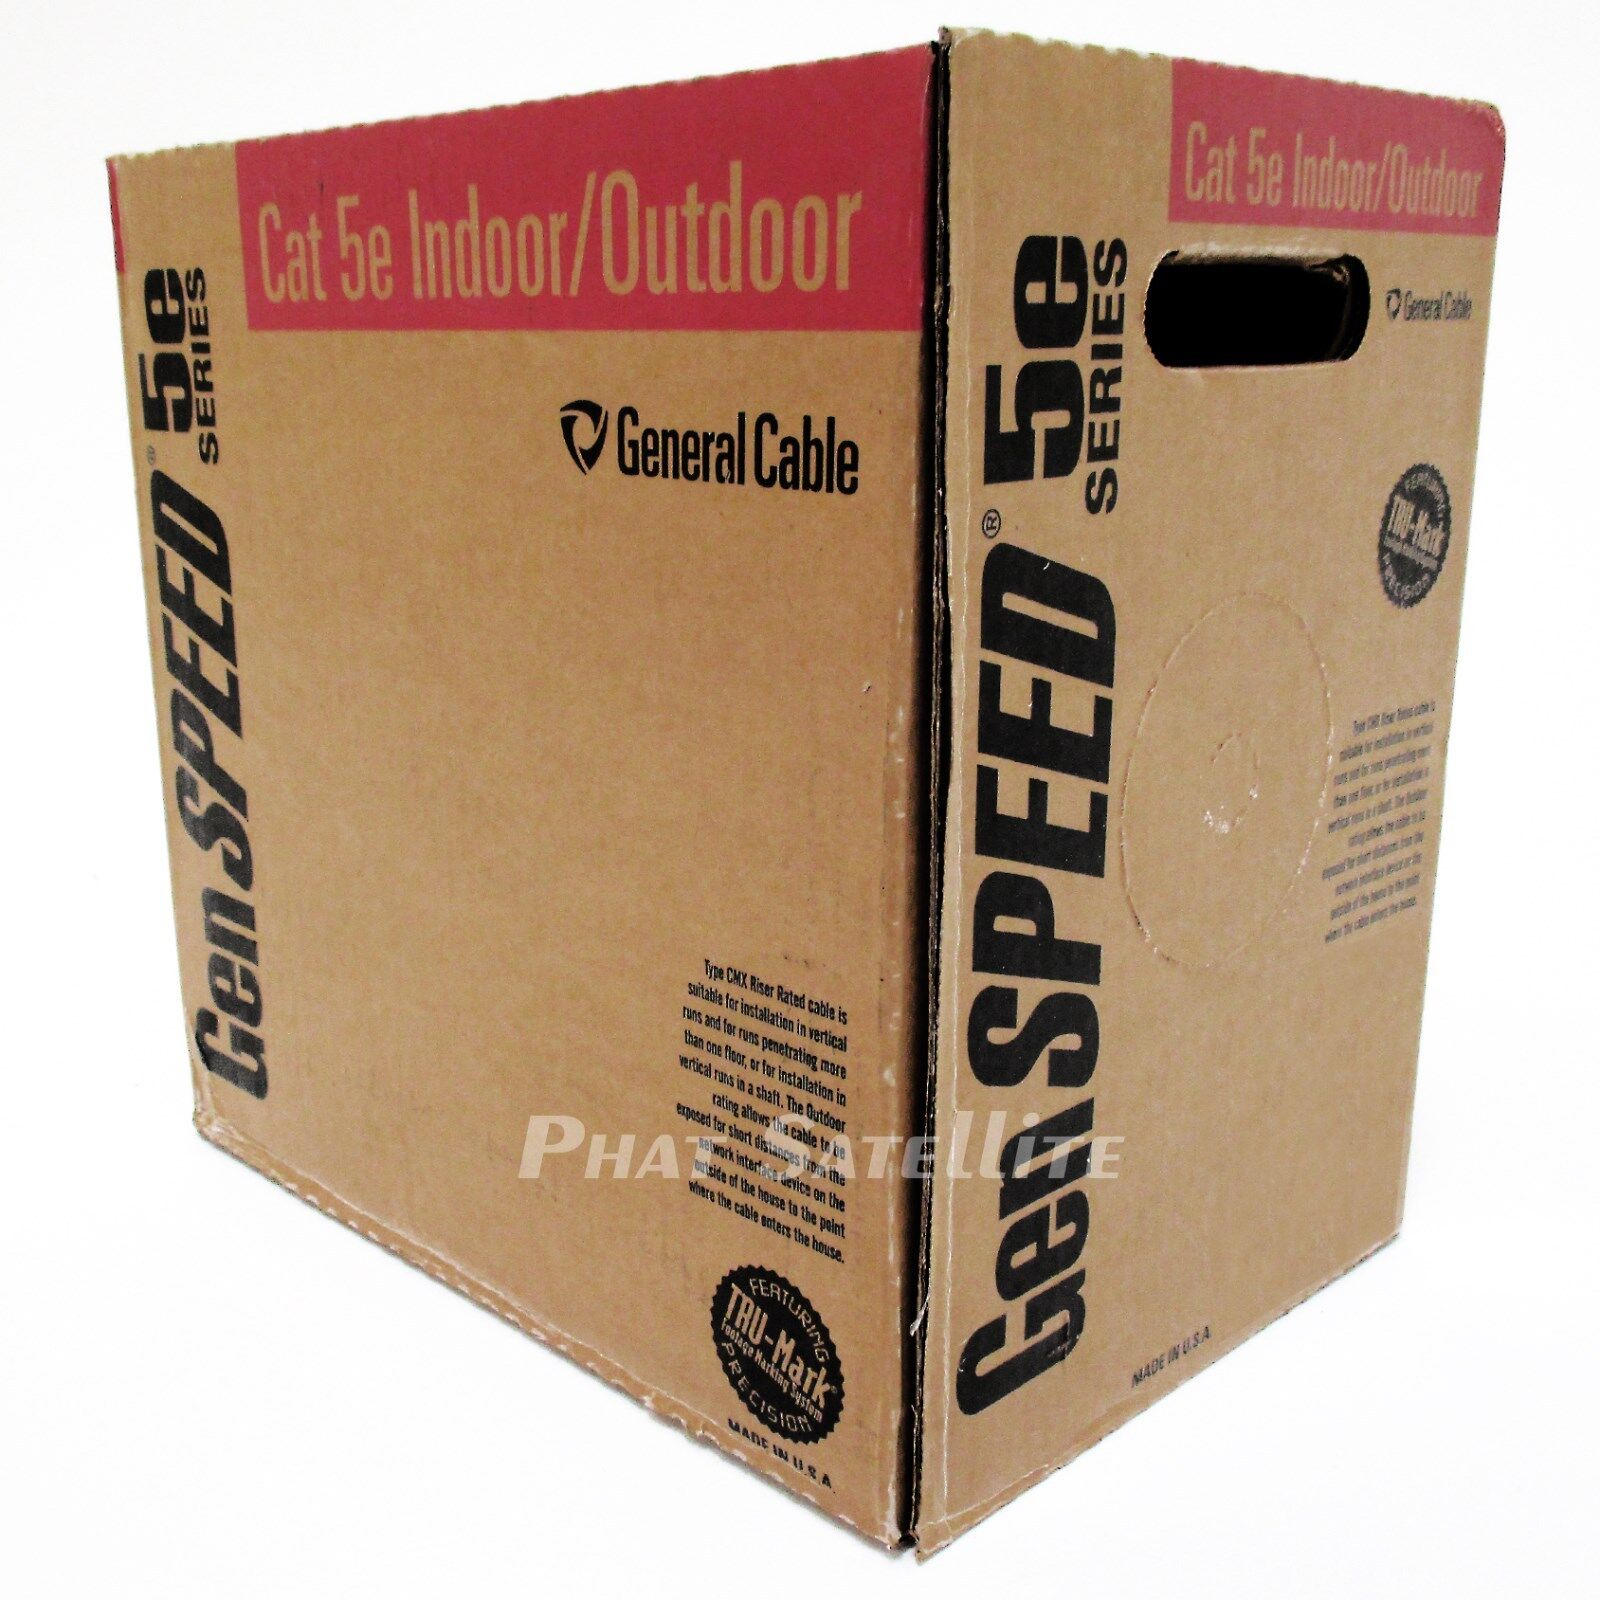 2 BOXES OF GENSPEED 1000 FEET WHITE Cat5e cable CMX 350mhz 24AWG SOLID COPPER